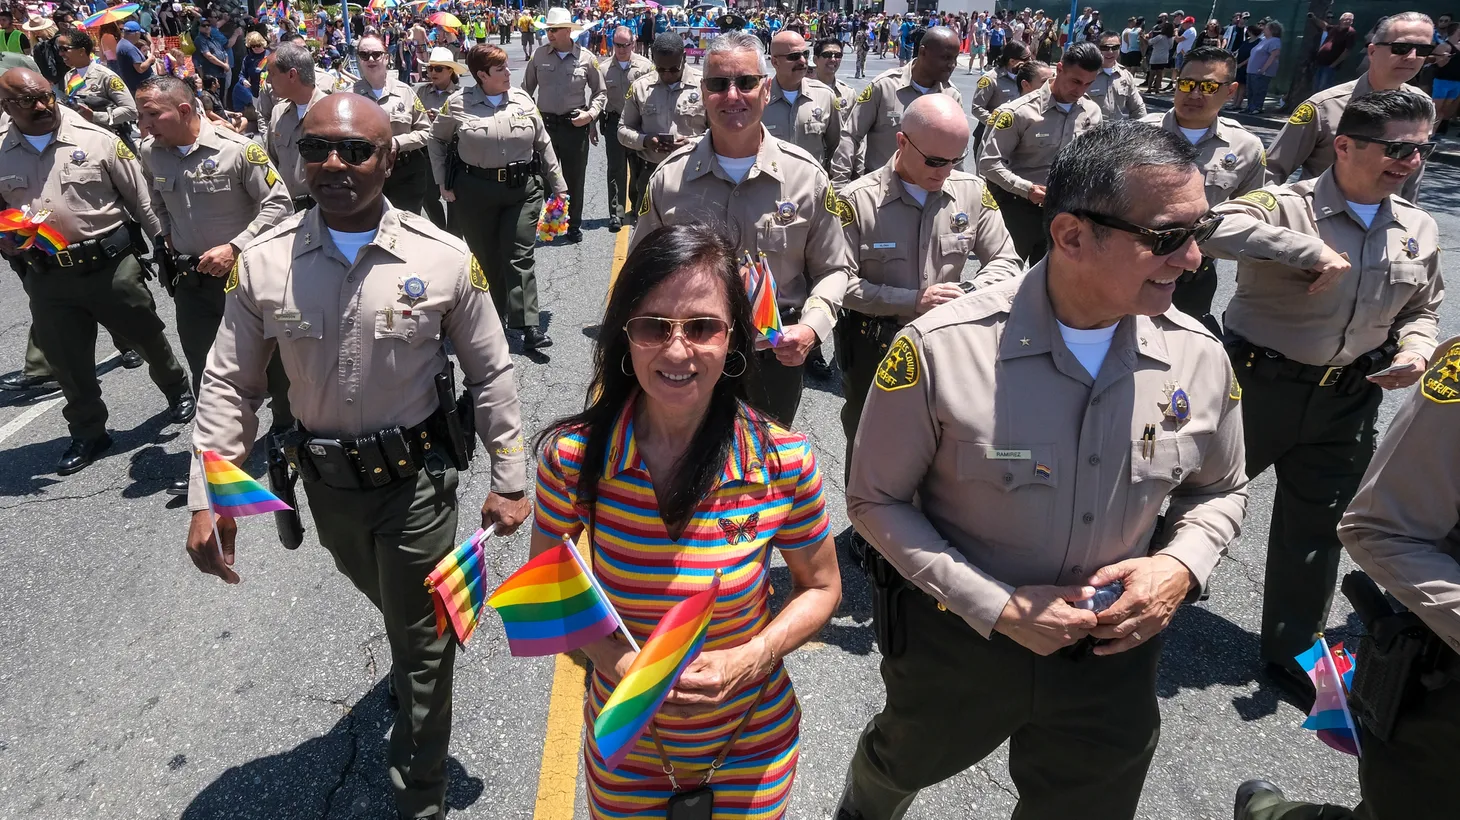 LA County sheriff’s deputies march in West Hollywood’s Pride parade, June 1, 2022.